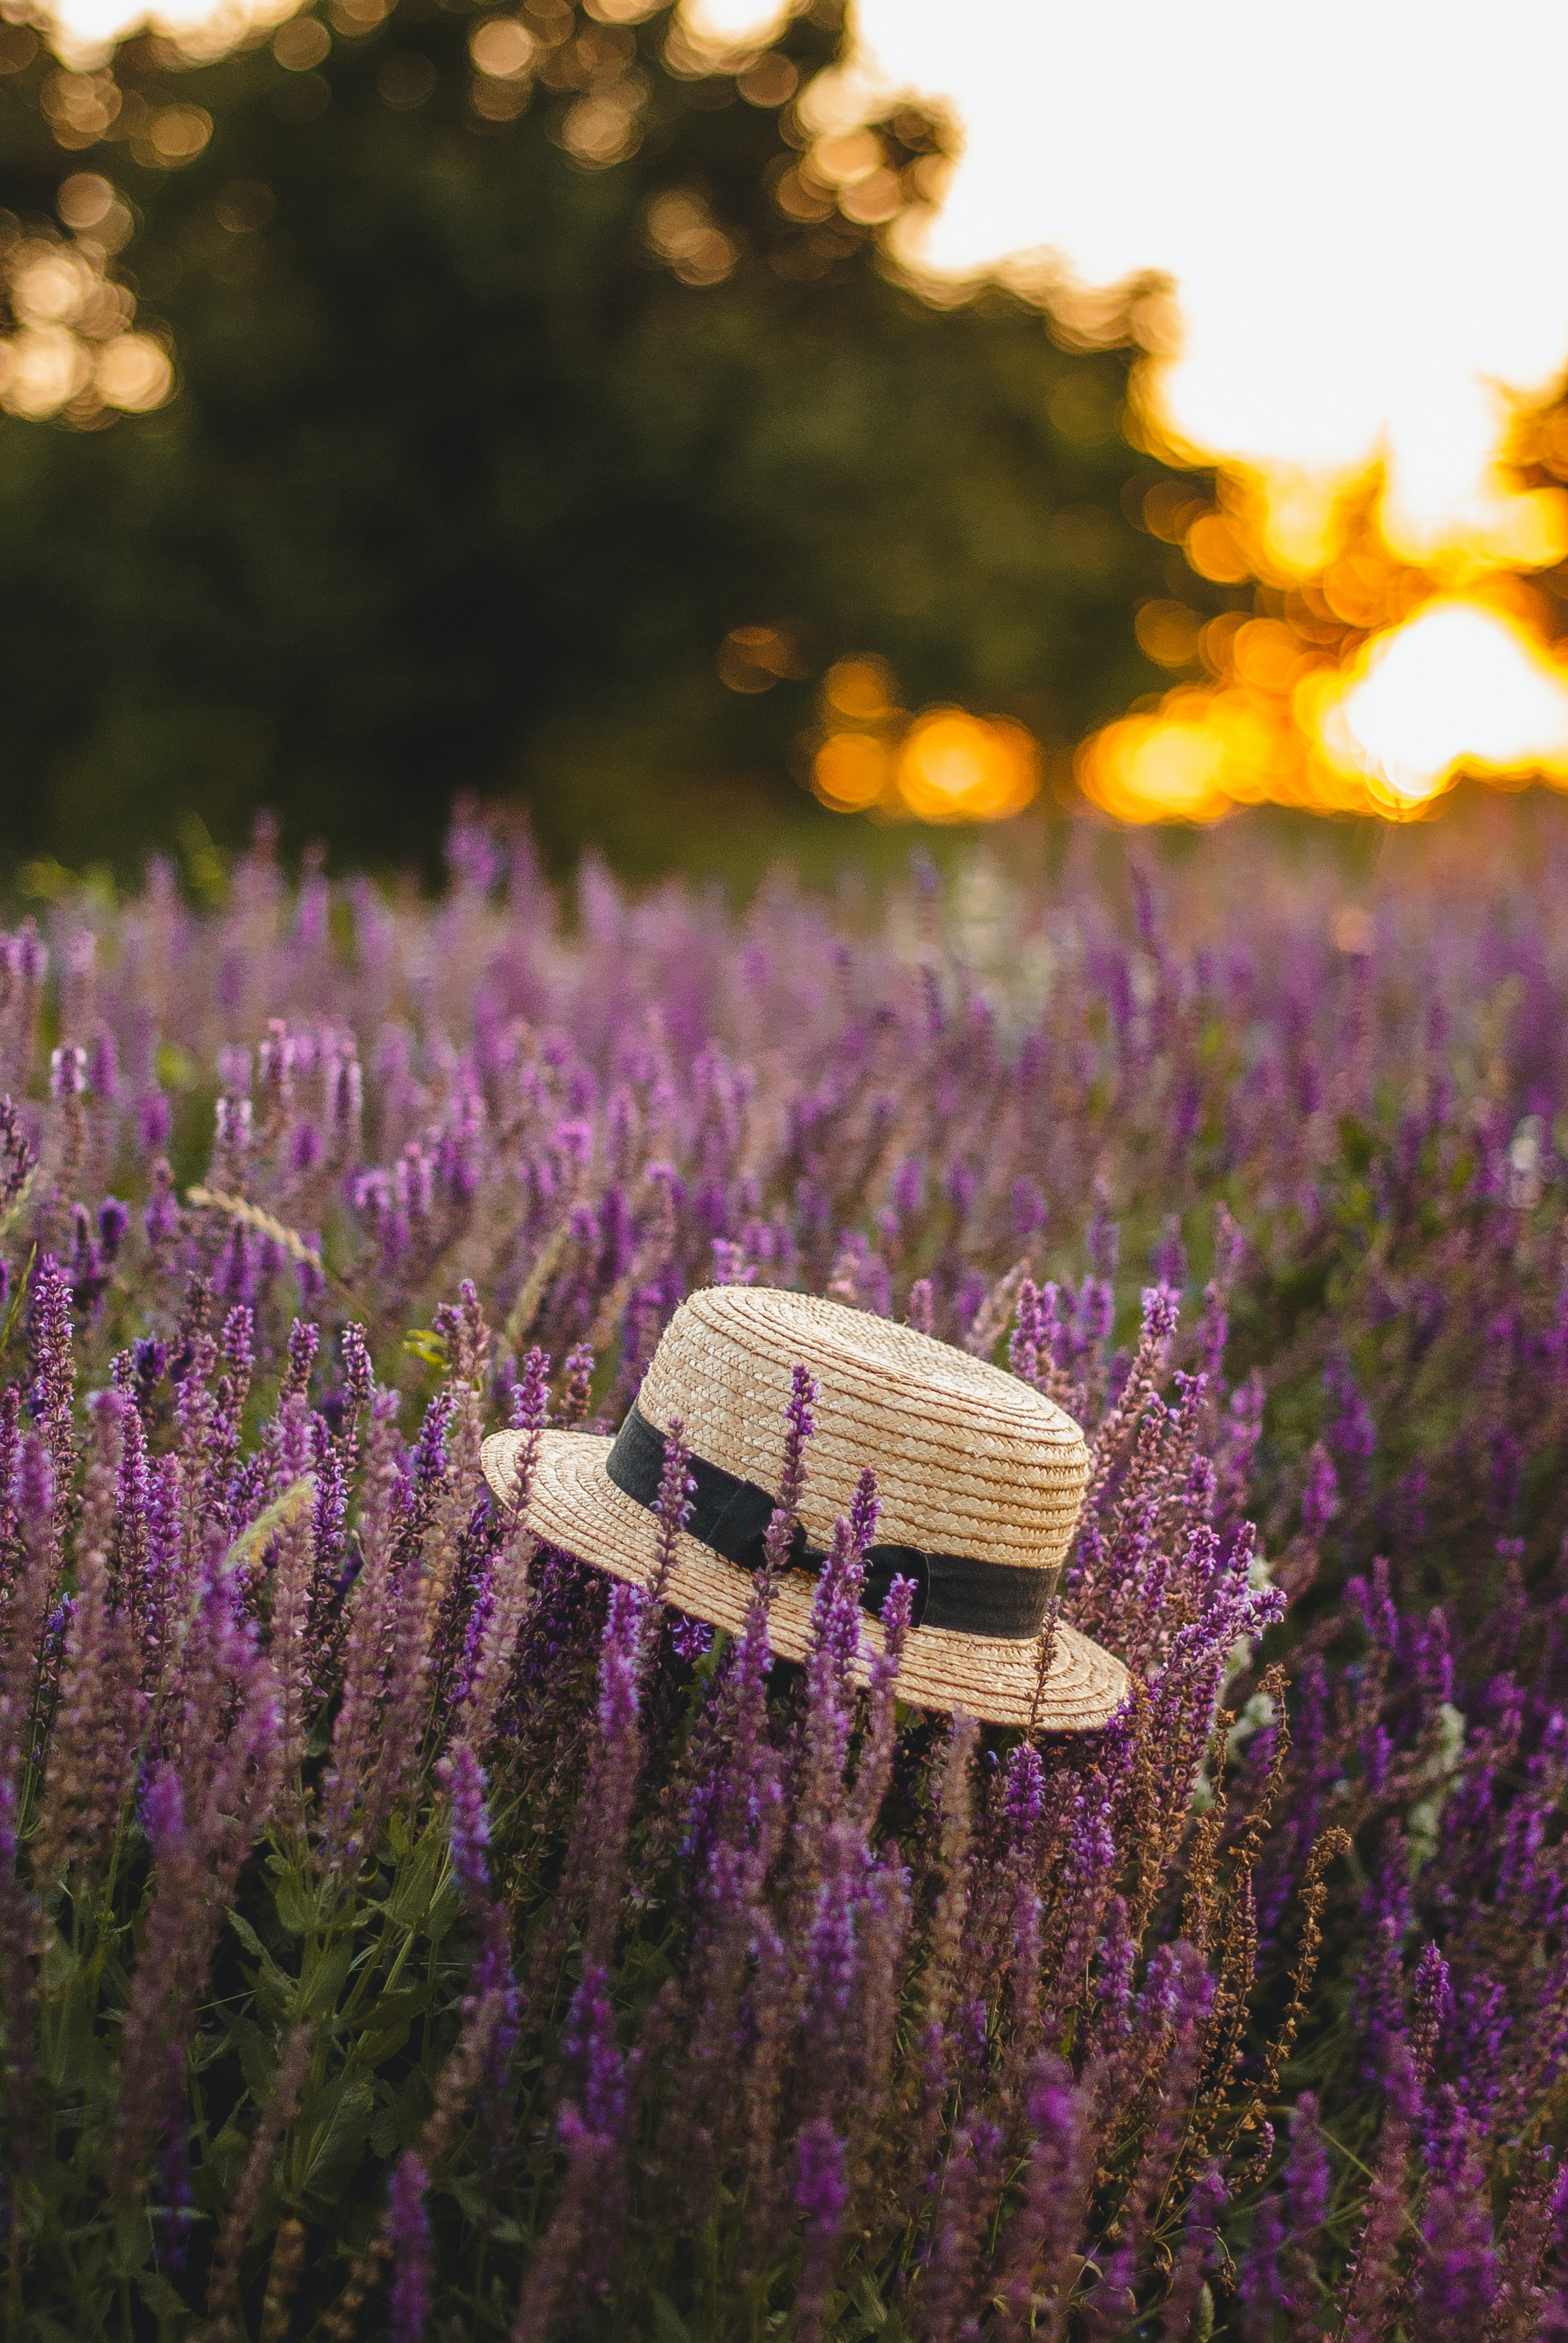 Cool Wallpapers lavender, flowers, miscellanea, miscellaneous, hat, wildflowers